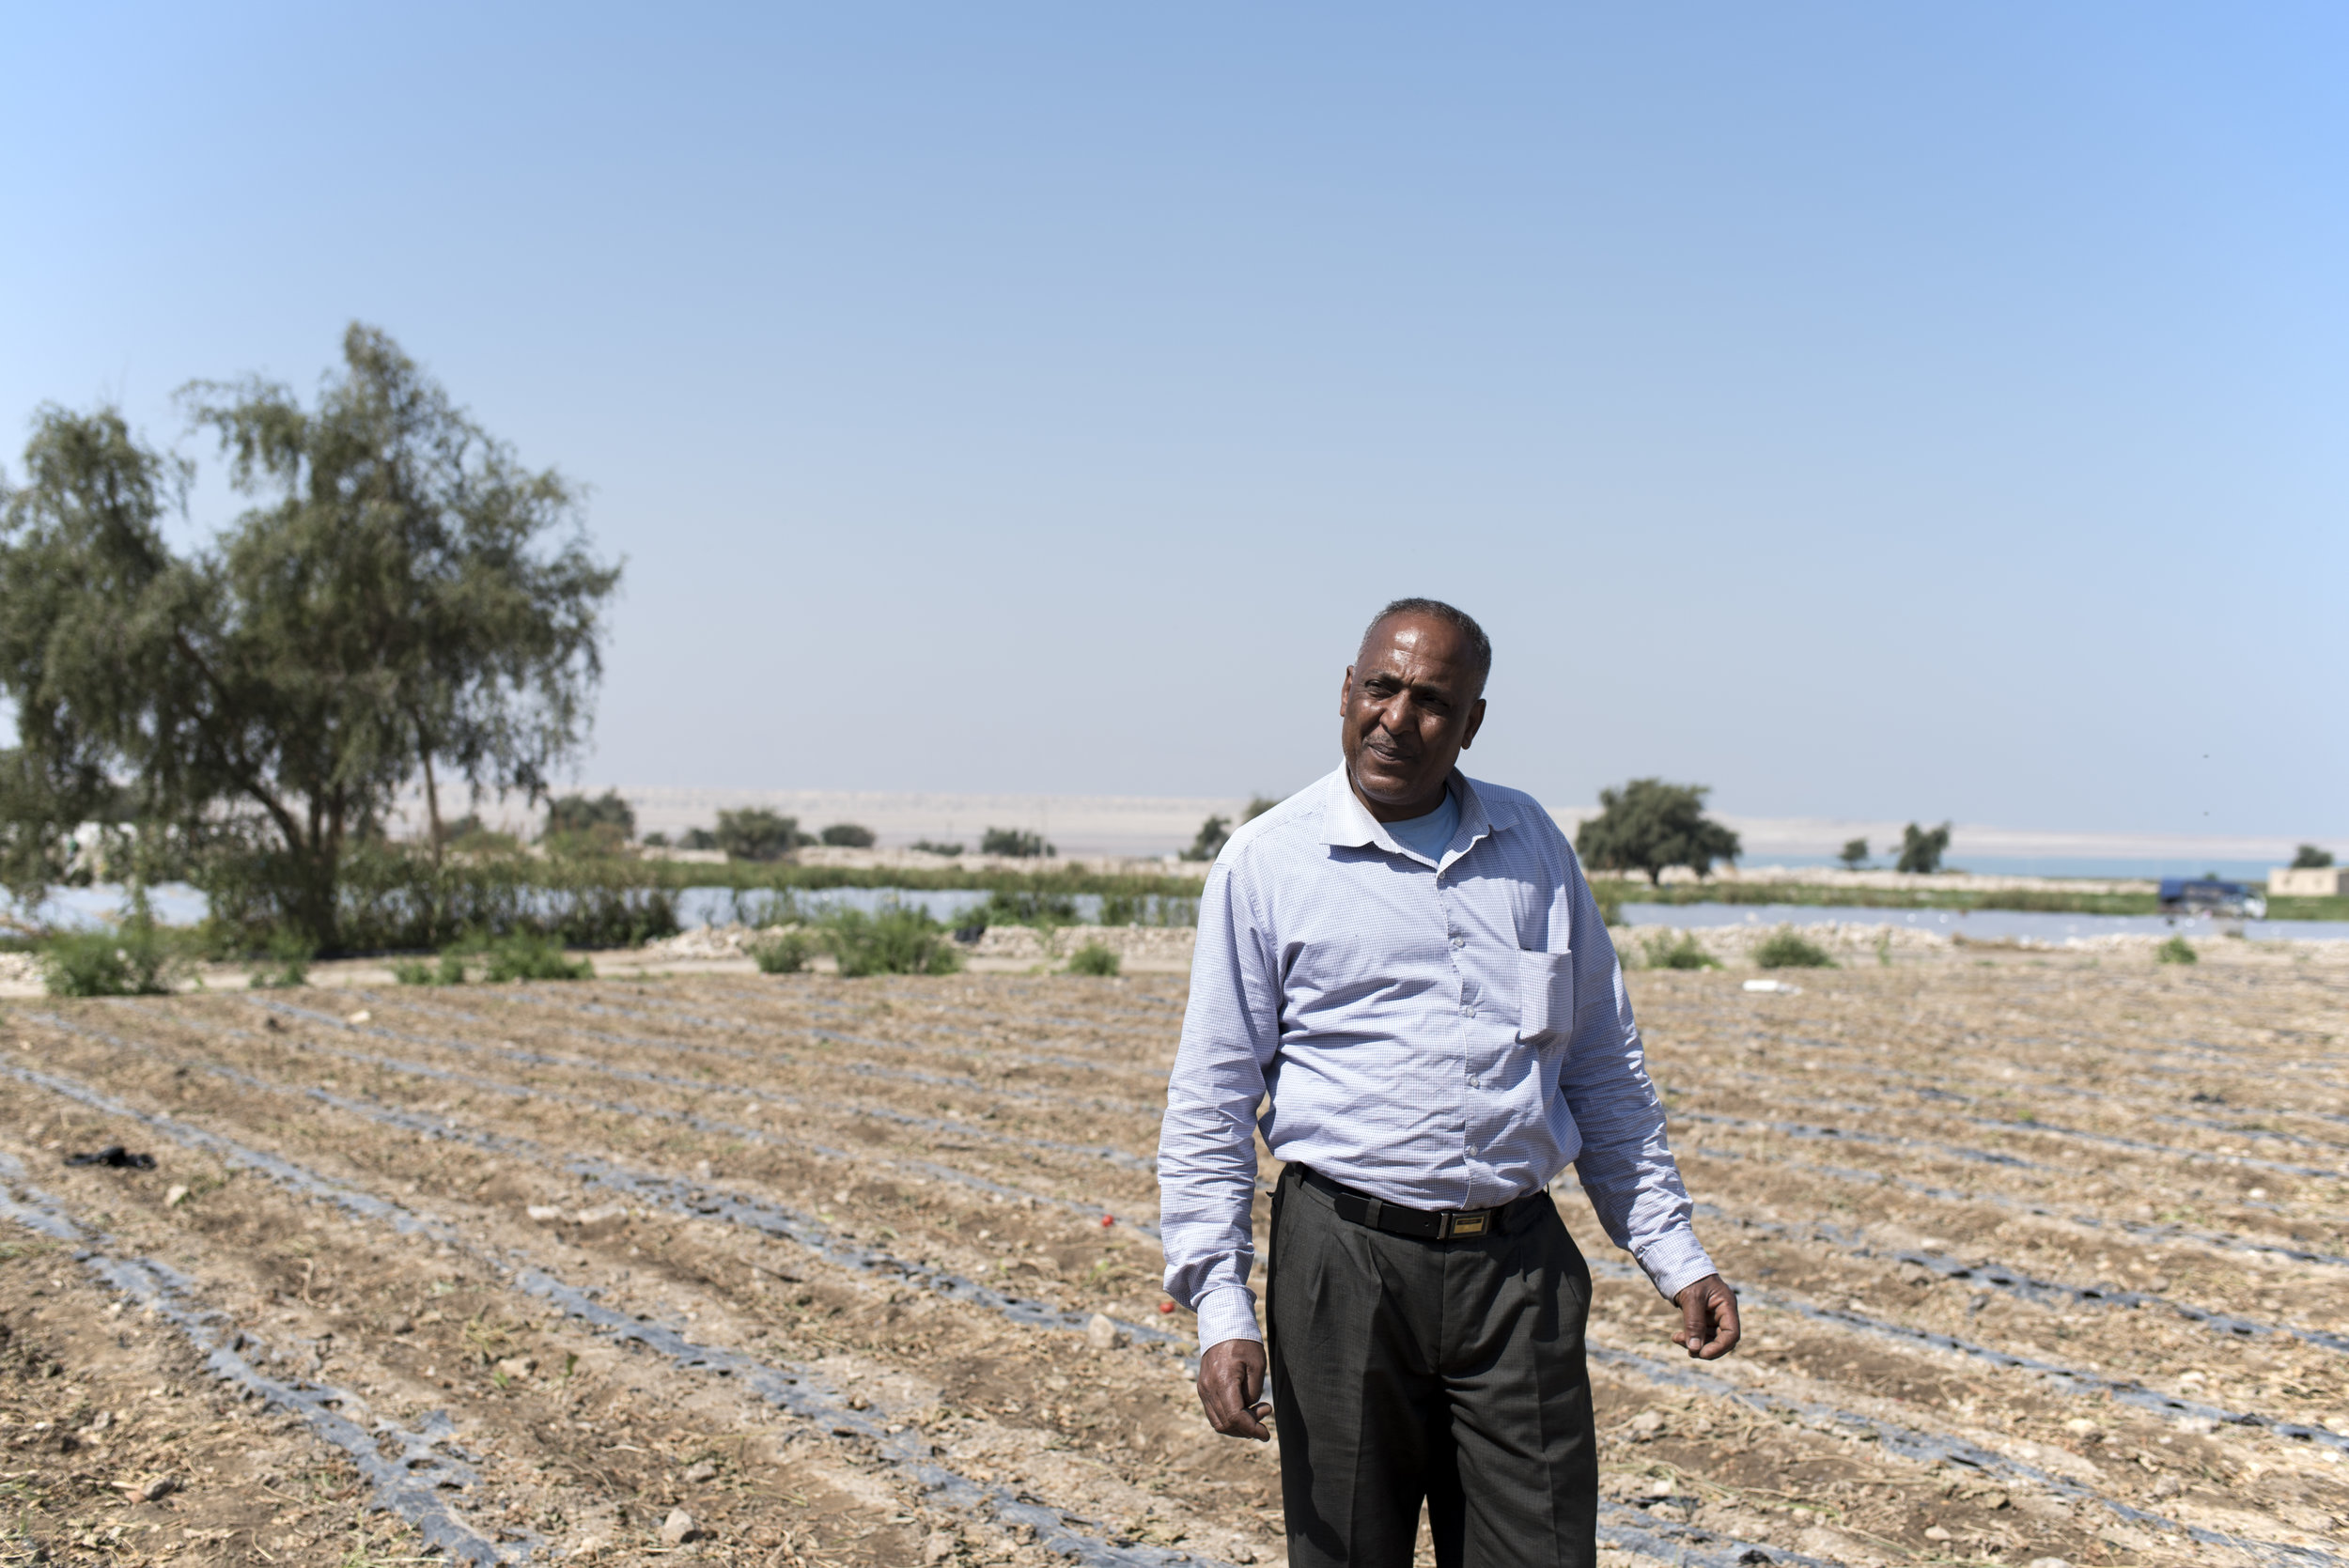 Abdul Alhay Alhwemen, a Jordanian farmer, shows his fields, which used to be only a few paces from the shoreline when he was young.